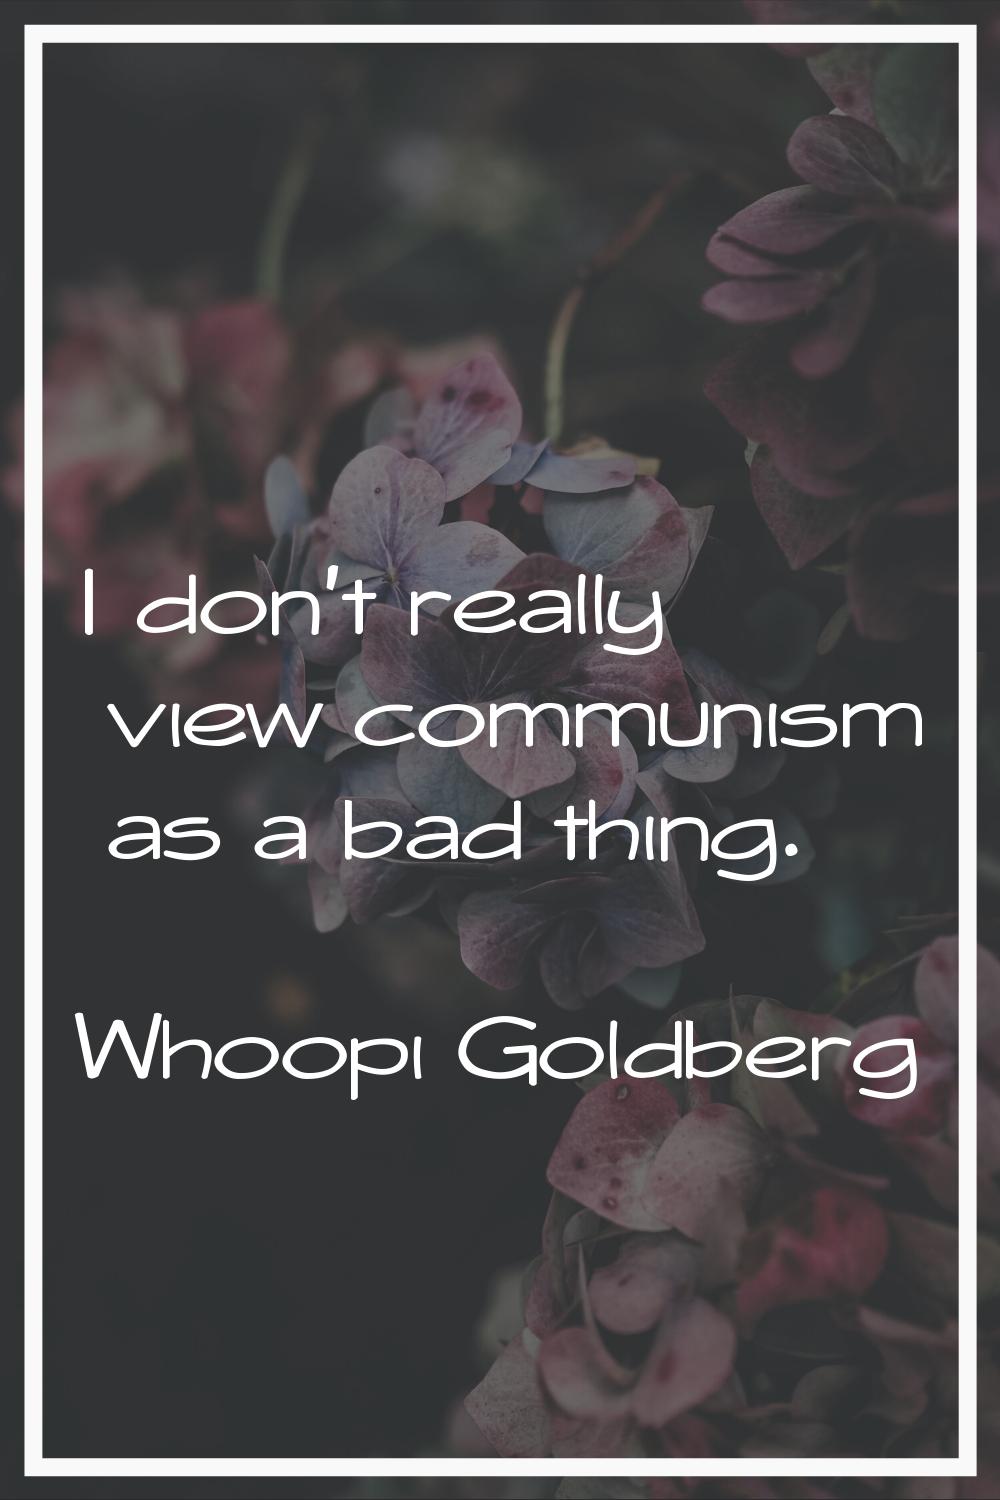 I don't really view communism as a bad thing.